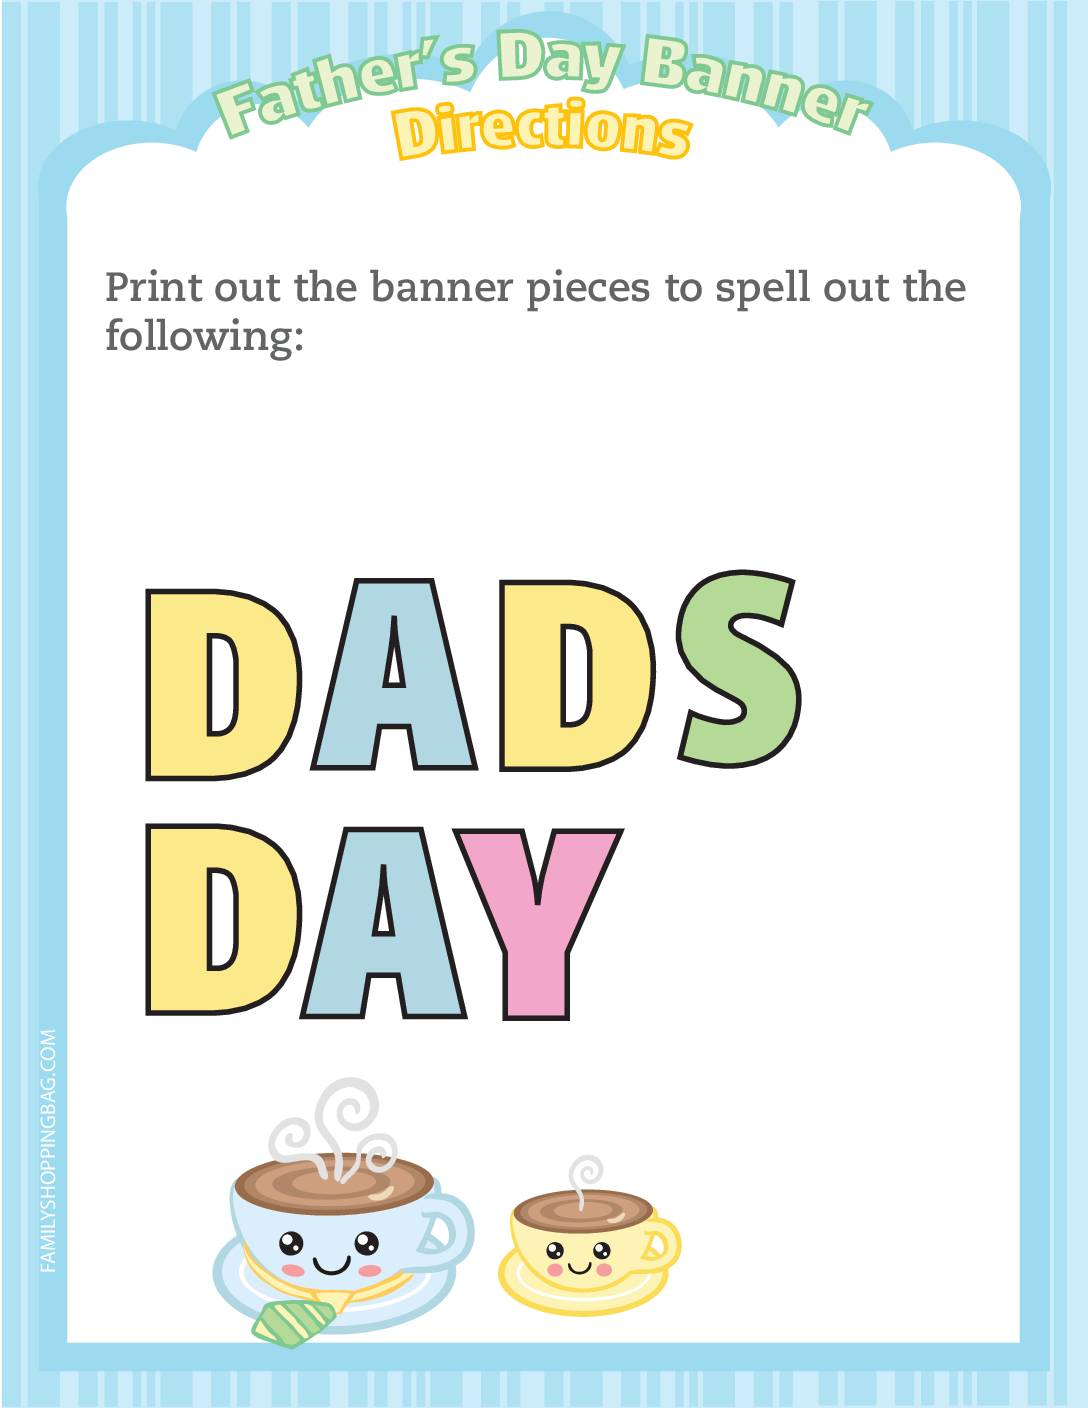 Banner Directions Fathers Day Breakfast